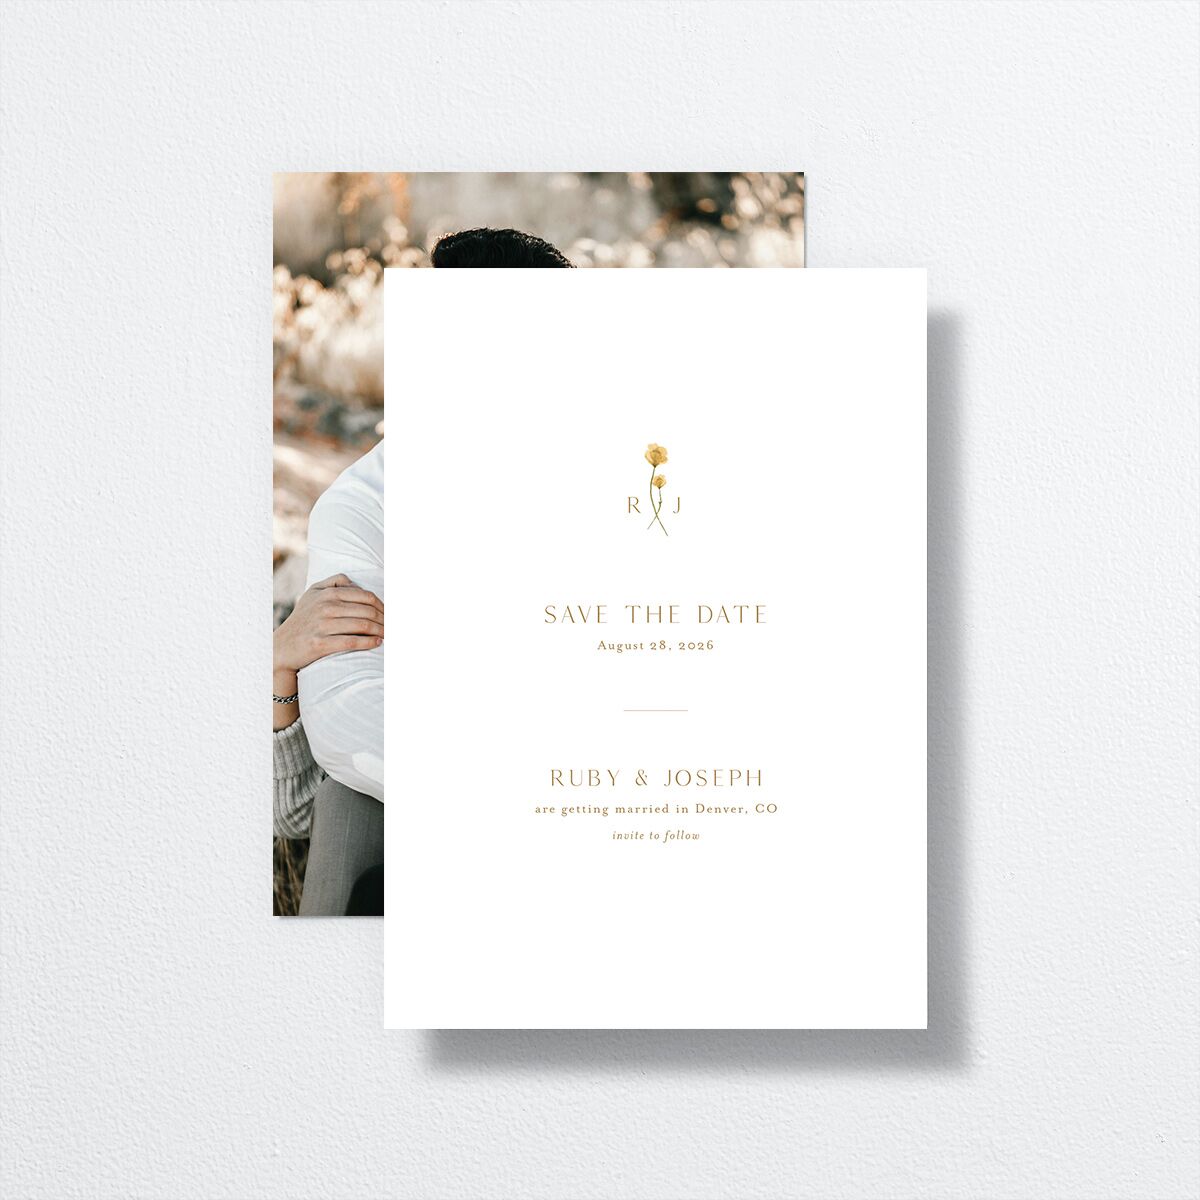 Dainty Monogram Save the Date Cards front-and-back in yellow